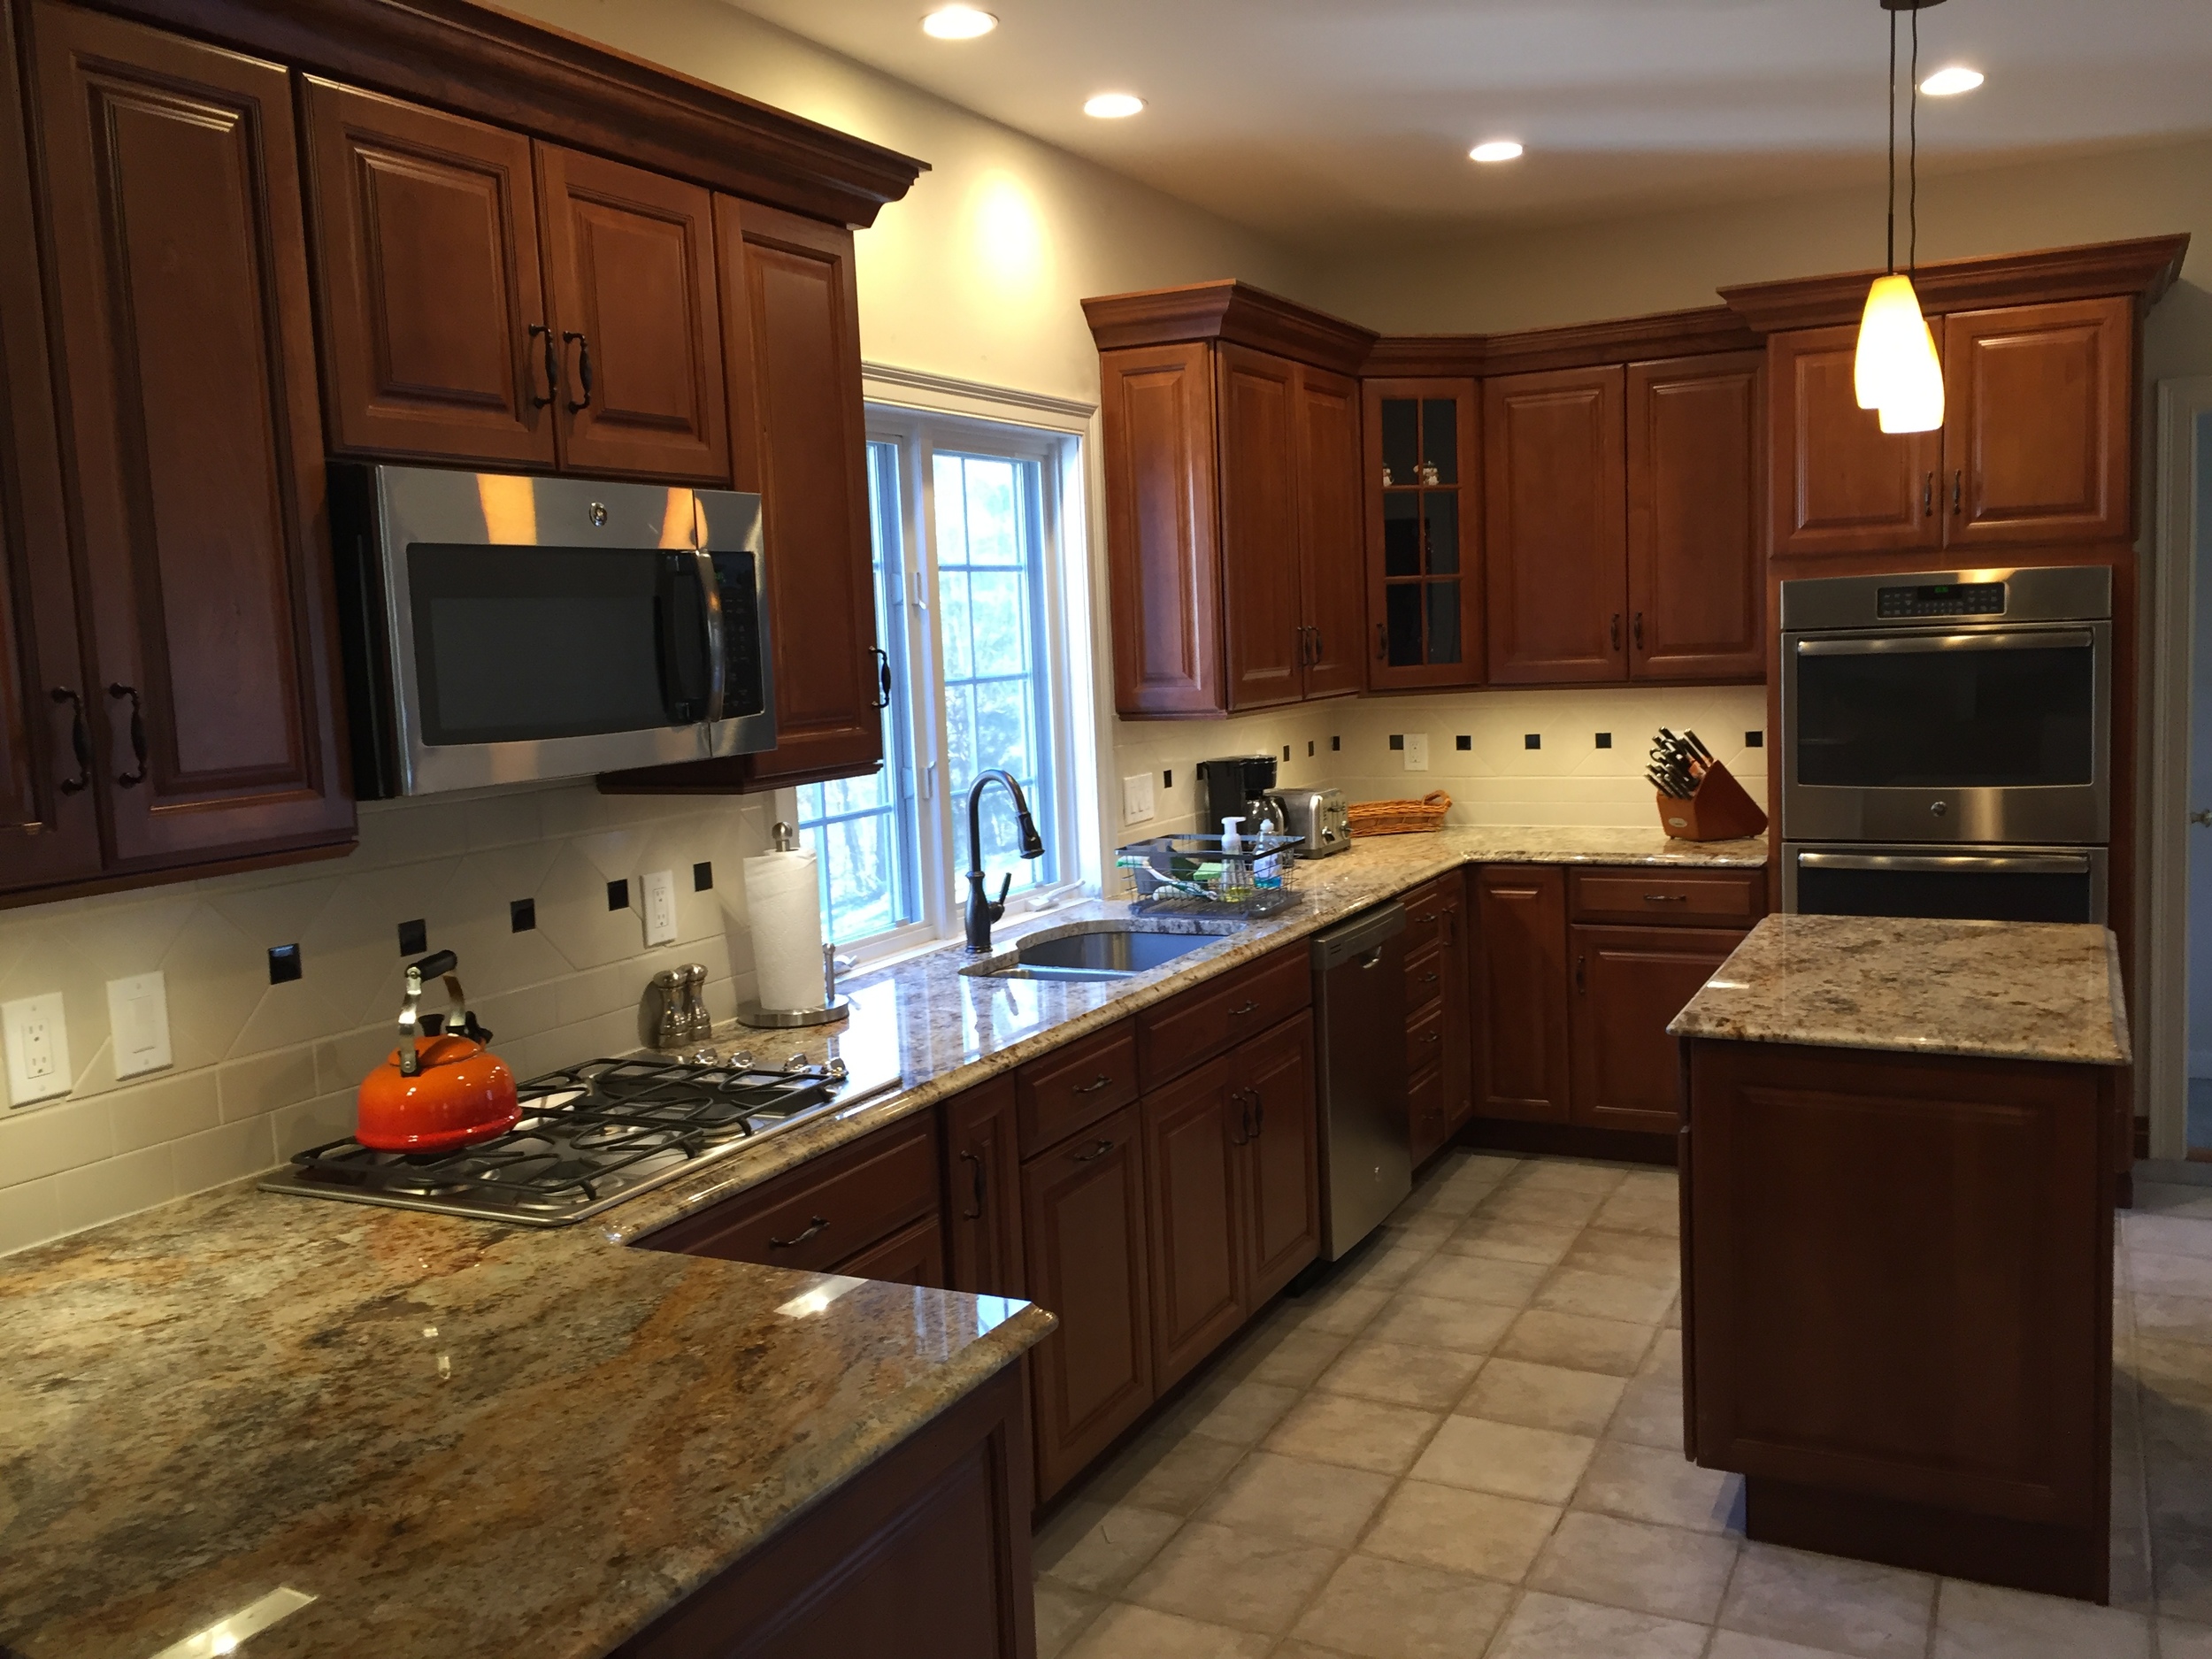 Home Remodeling, Additions, Kitchens, Basements, Bathrooms and Decks ...